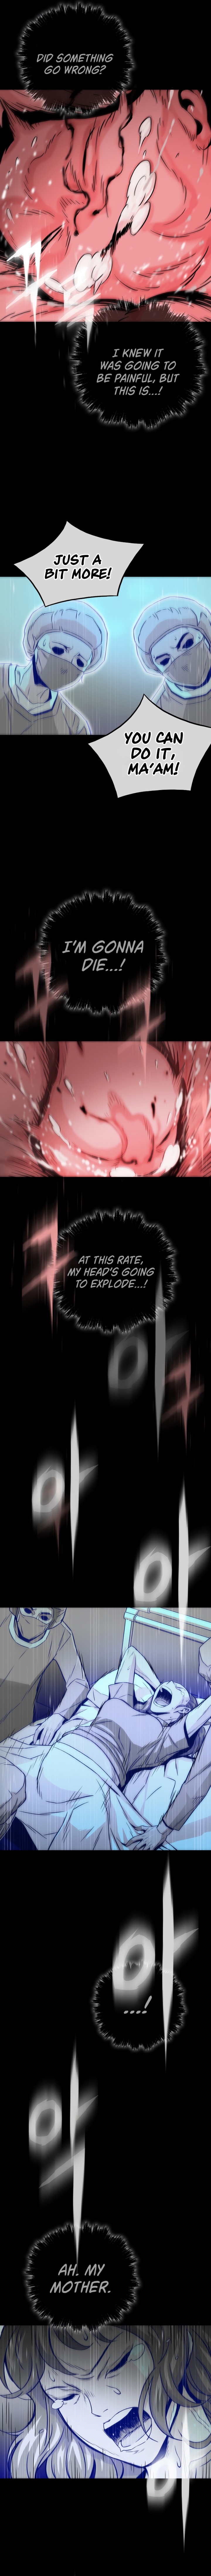 Past Life Returner - Chapter 1 Page 4